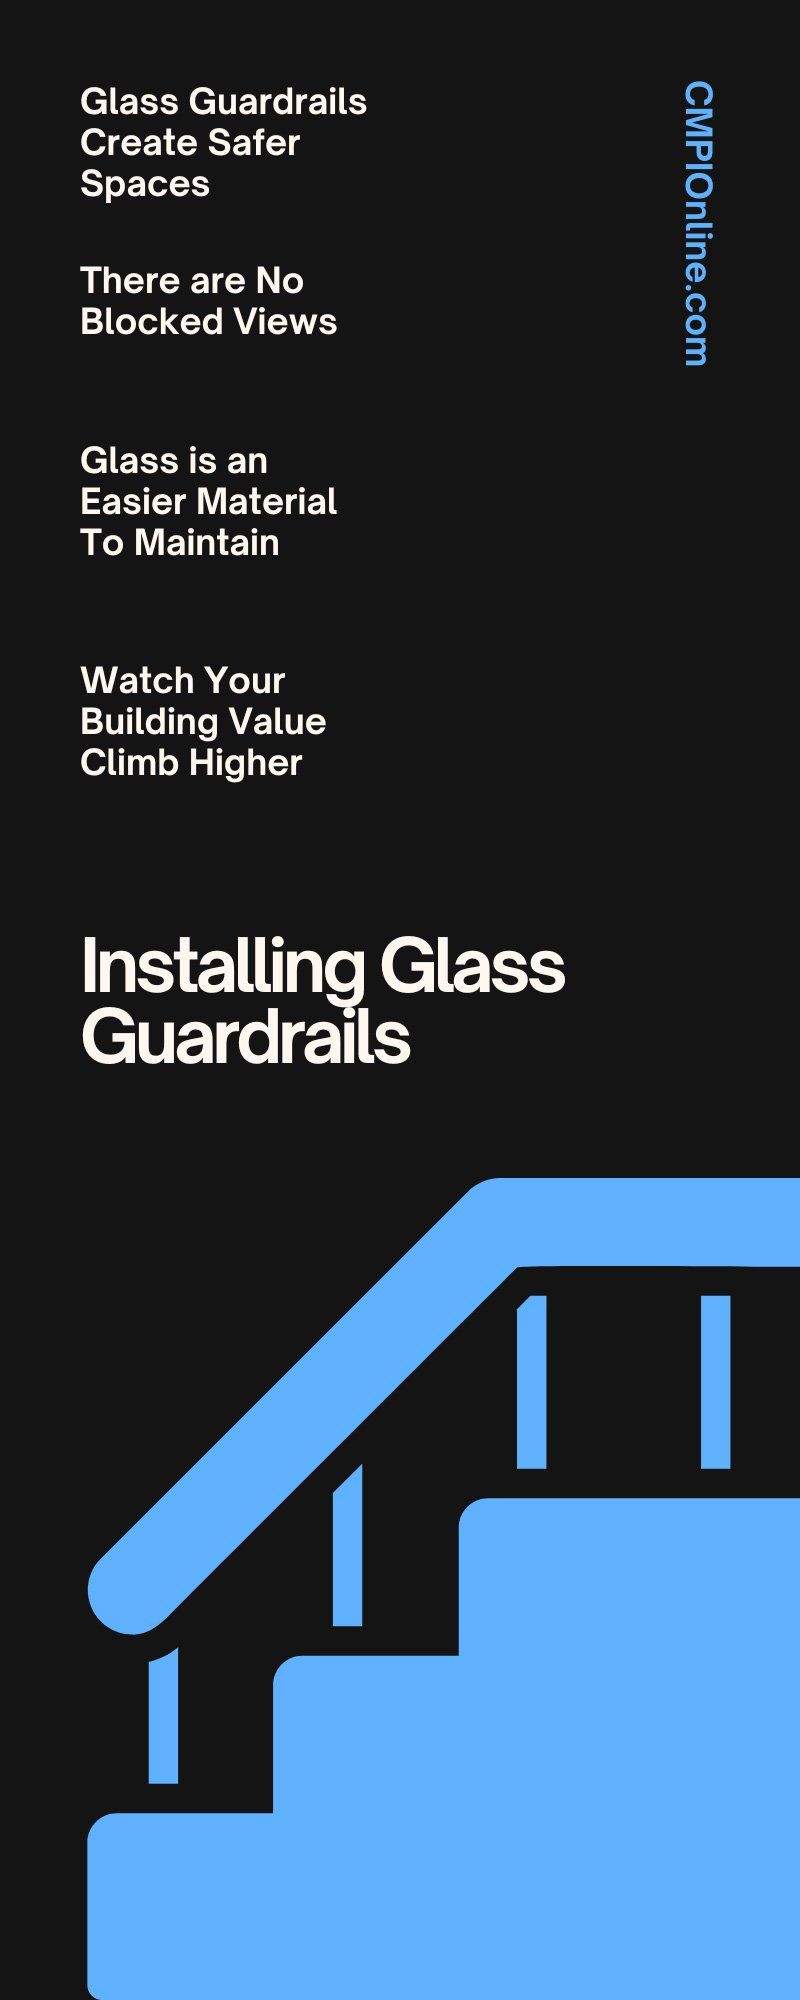 The Benefits of Installing Glass Guardrails in the Workplace